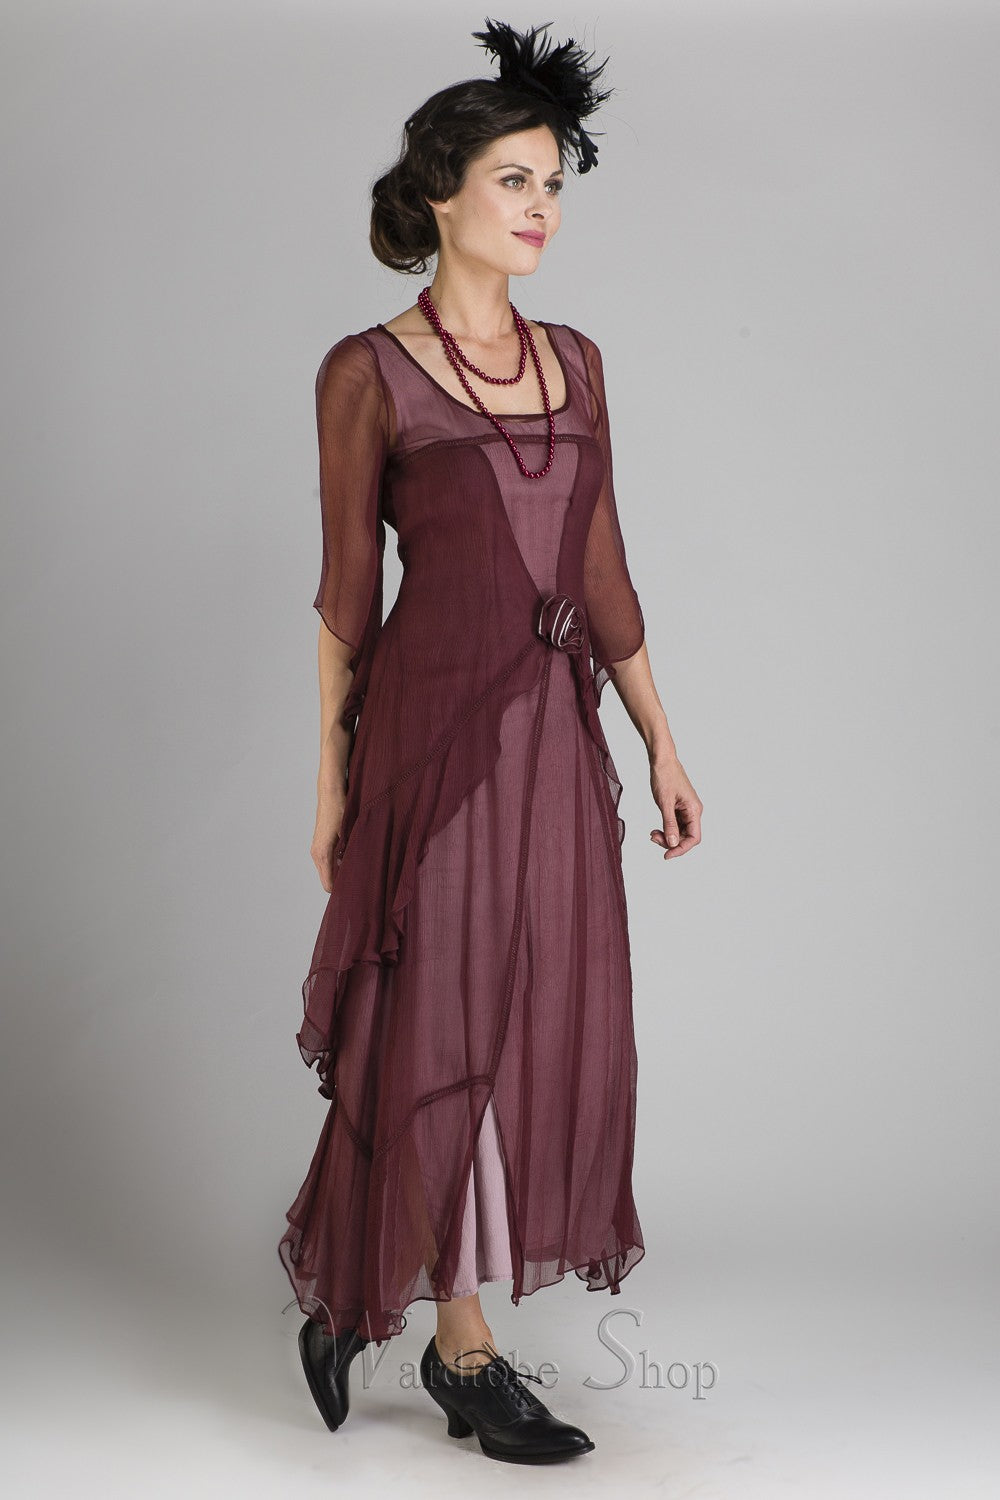 Great Gatsby Party Dress in Garnet by Nataya - SOLD OUT